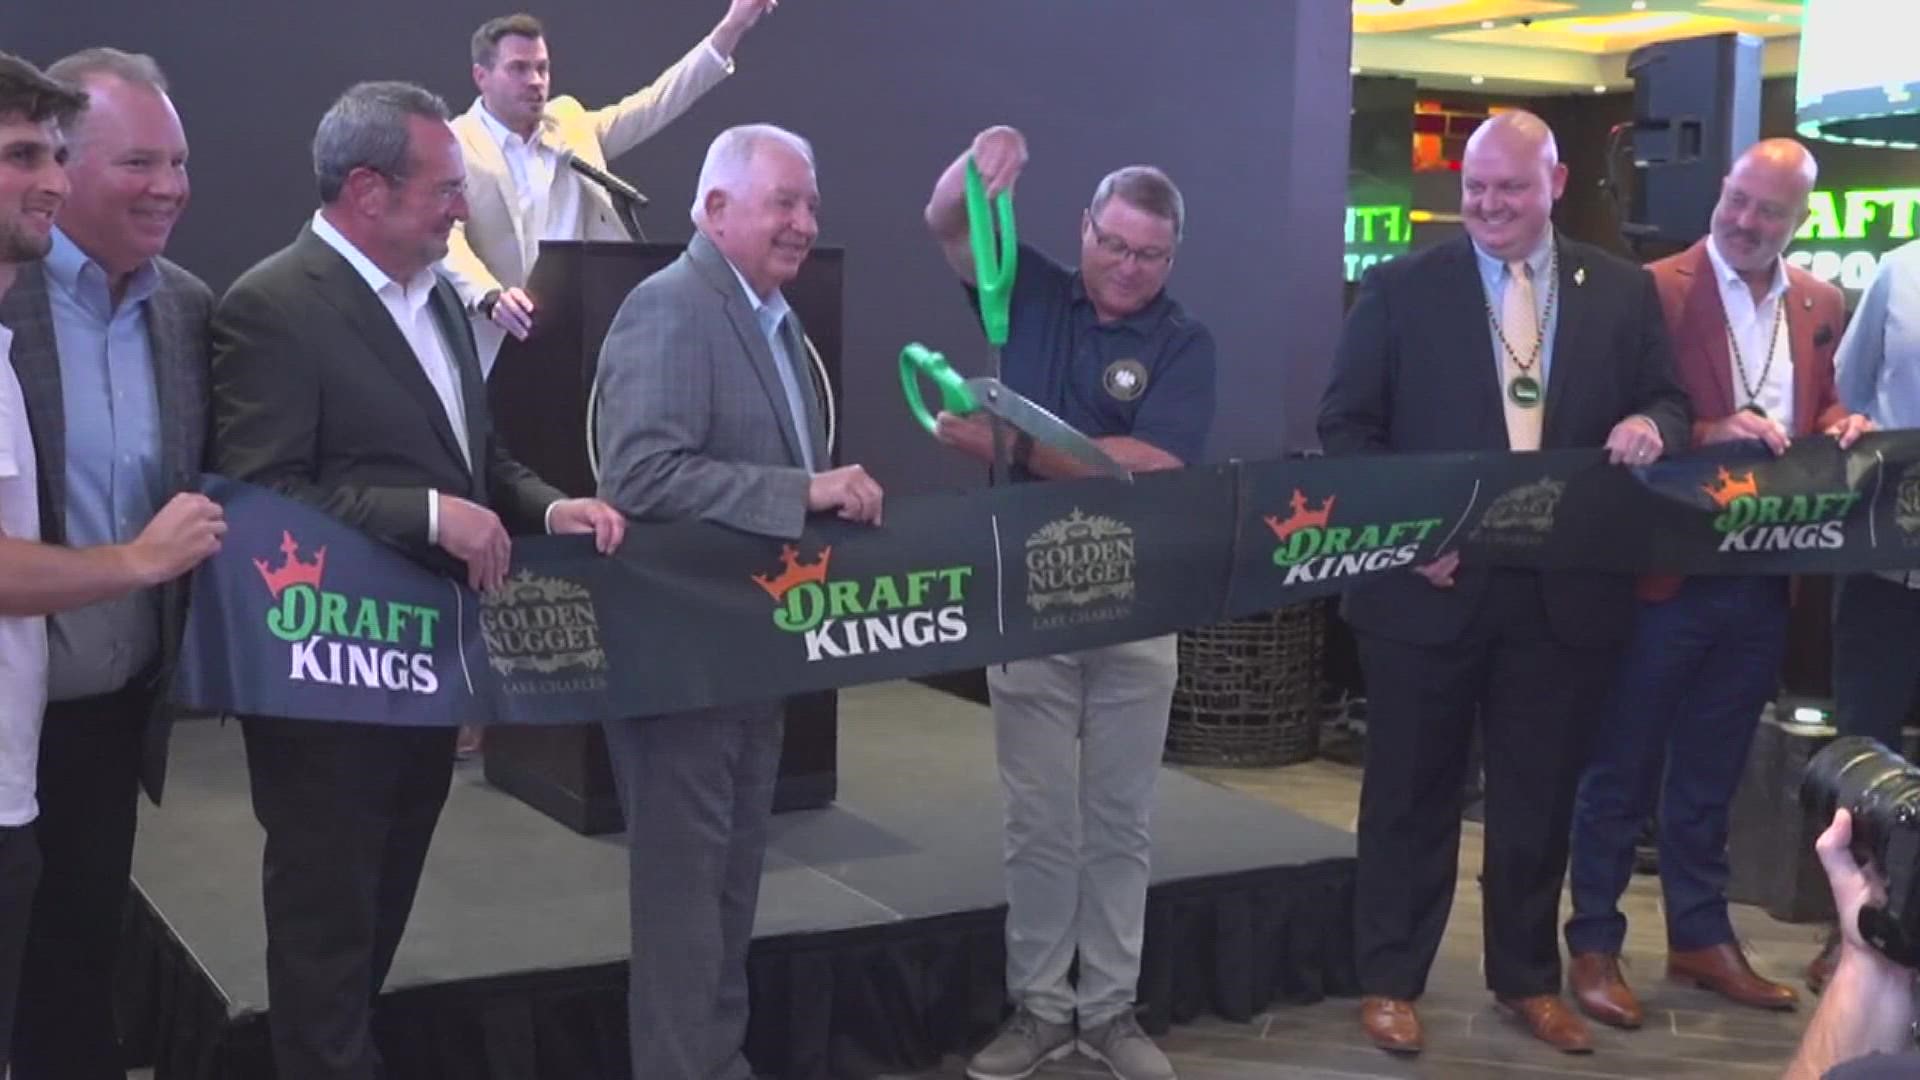 Draftkings Sportsbook first opened in November 2021 at the Lake Charles casino.